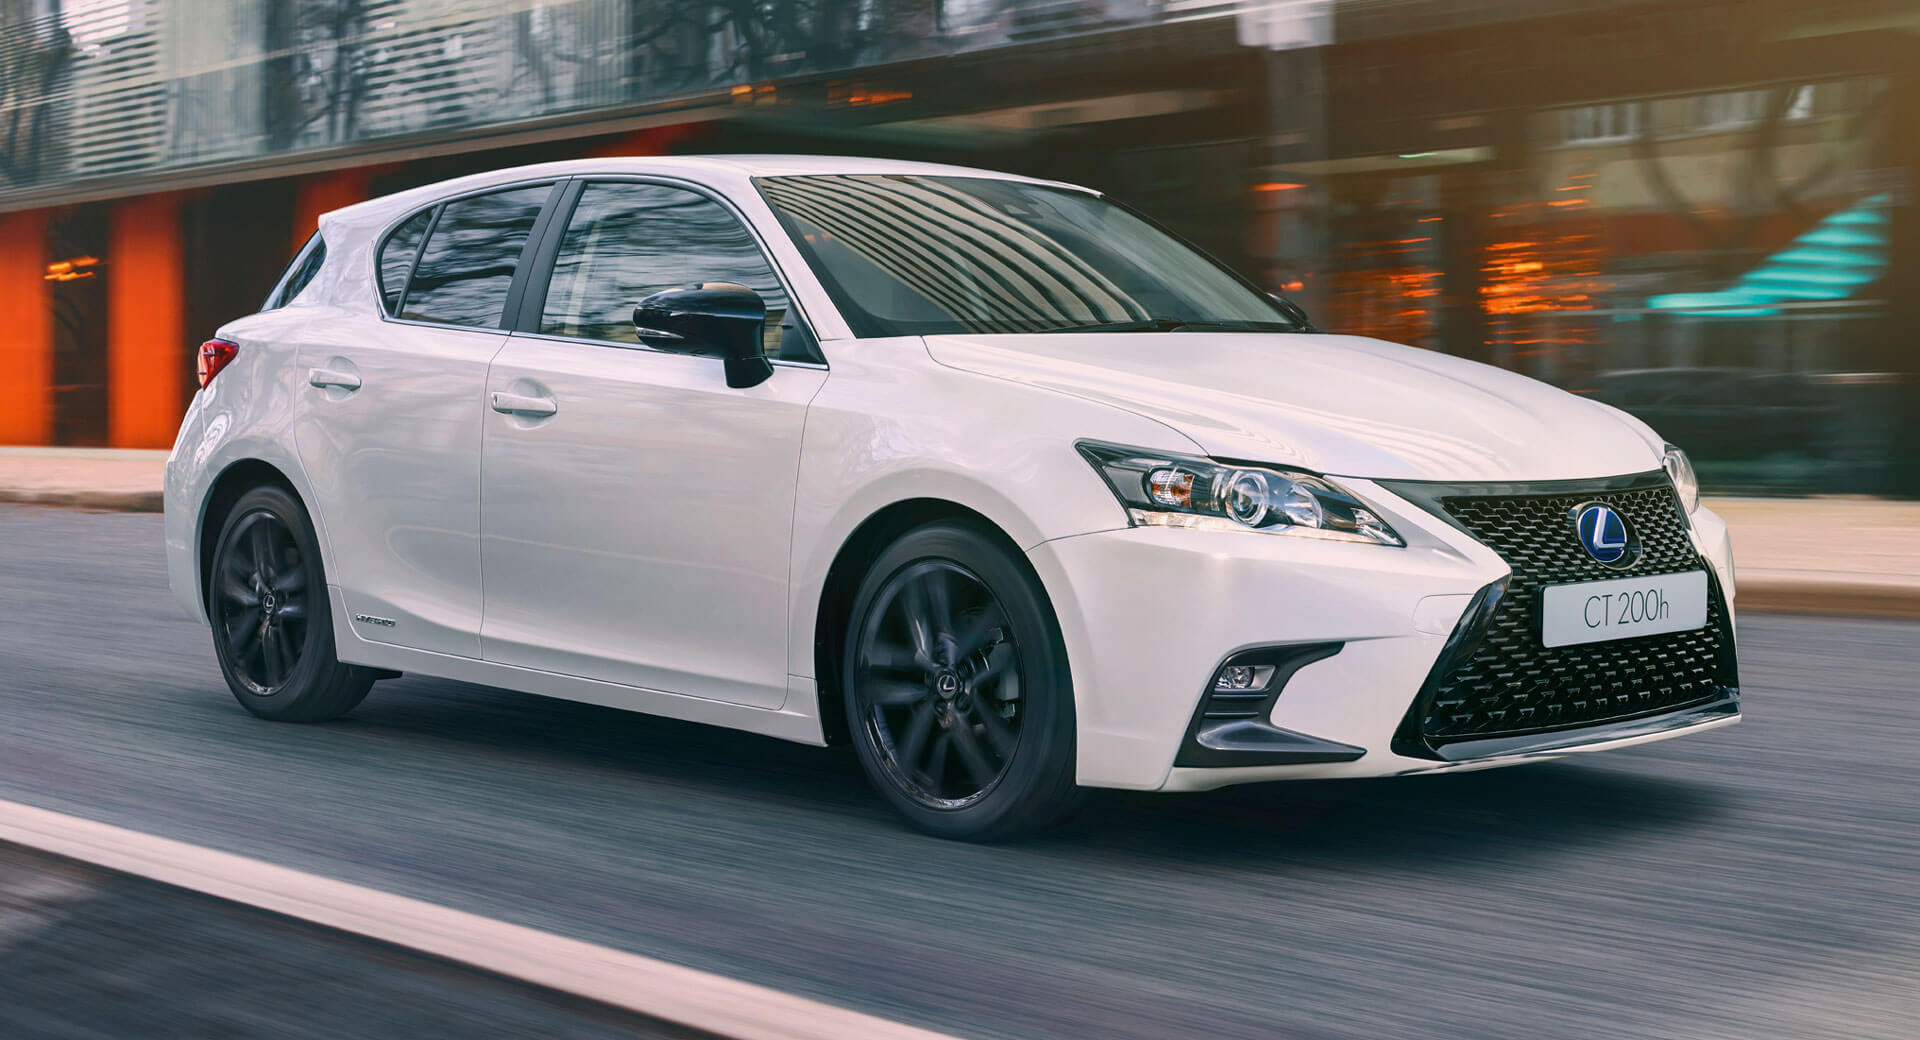 2019 Lexus CT 200h Arrives With New Grades And Specifications Carscoops